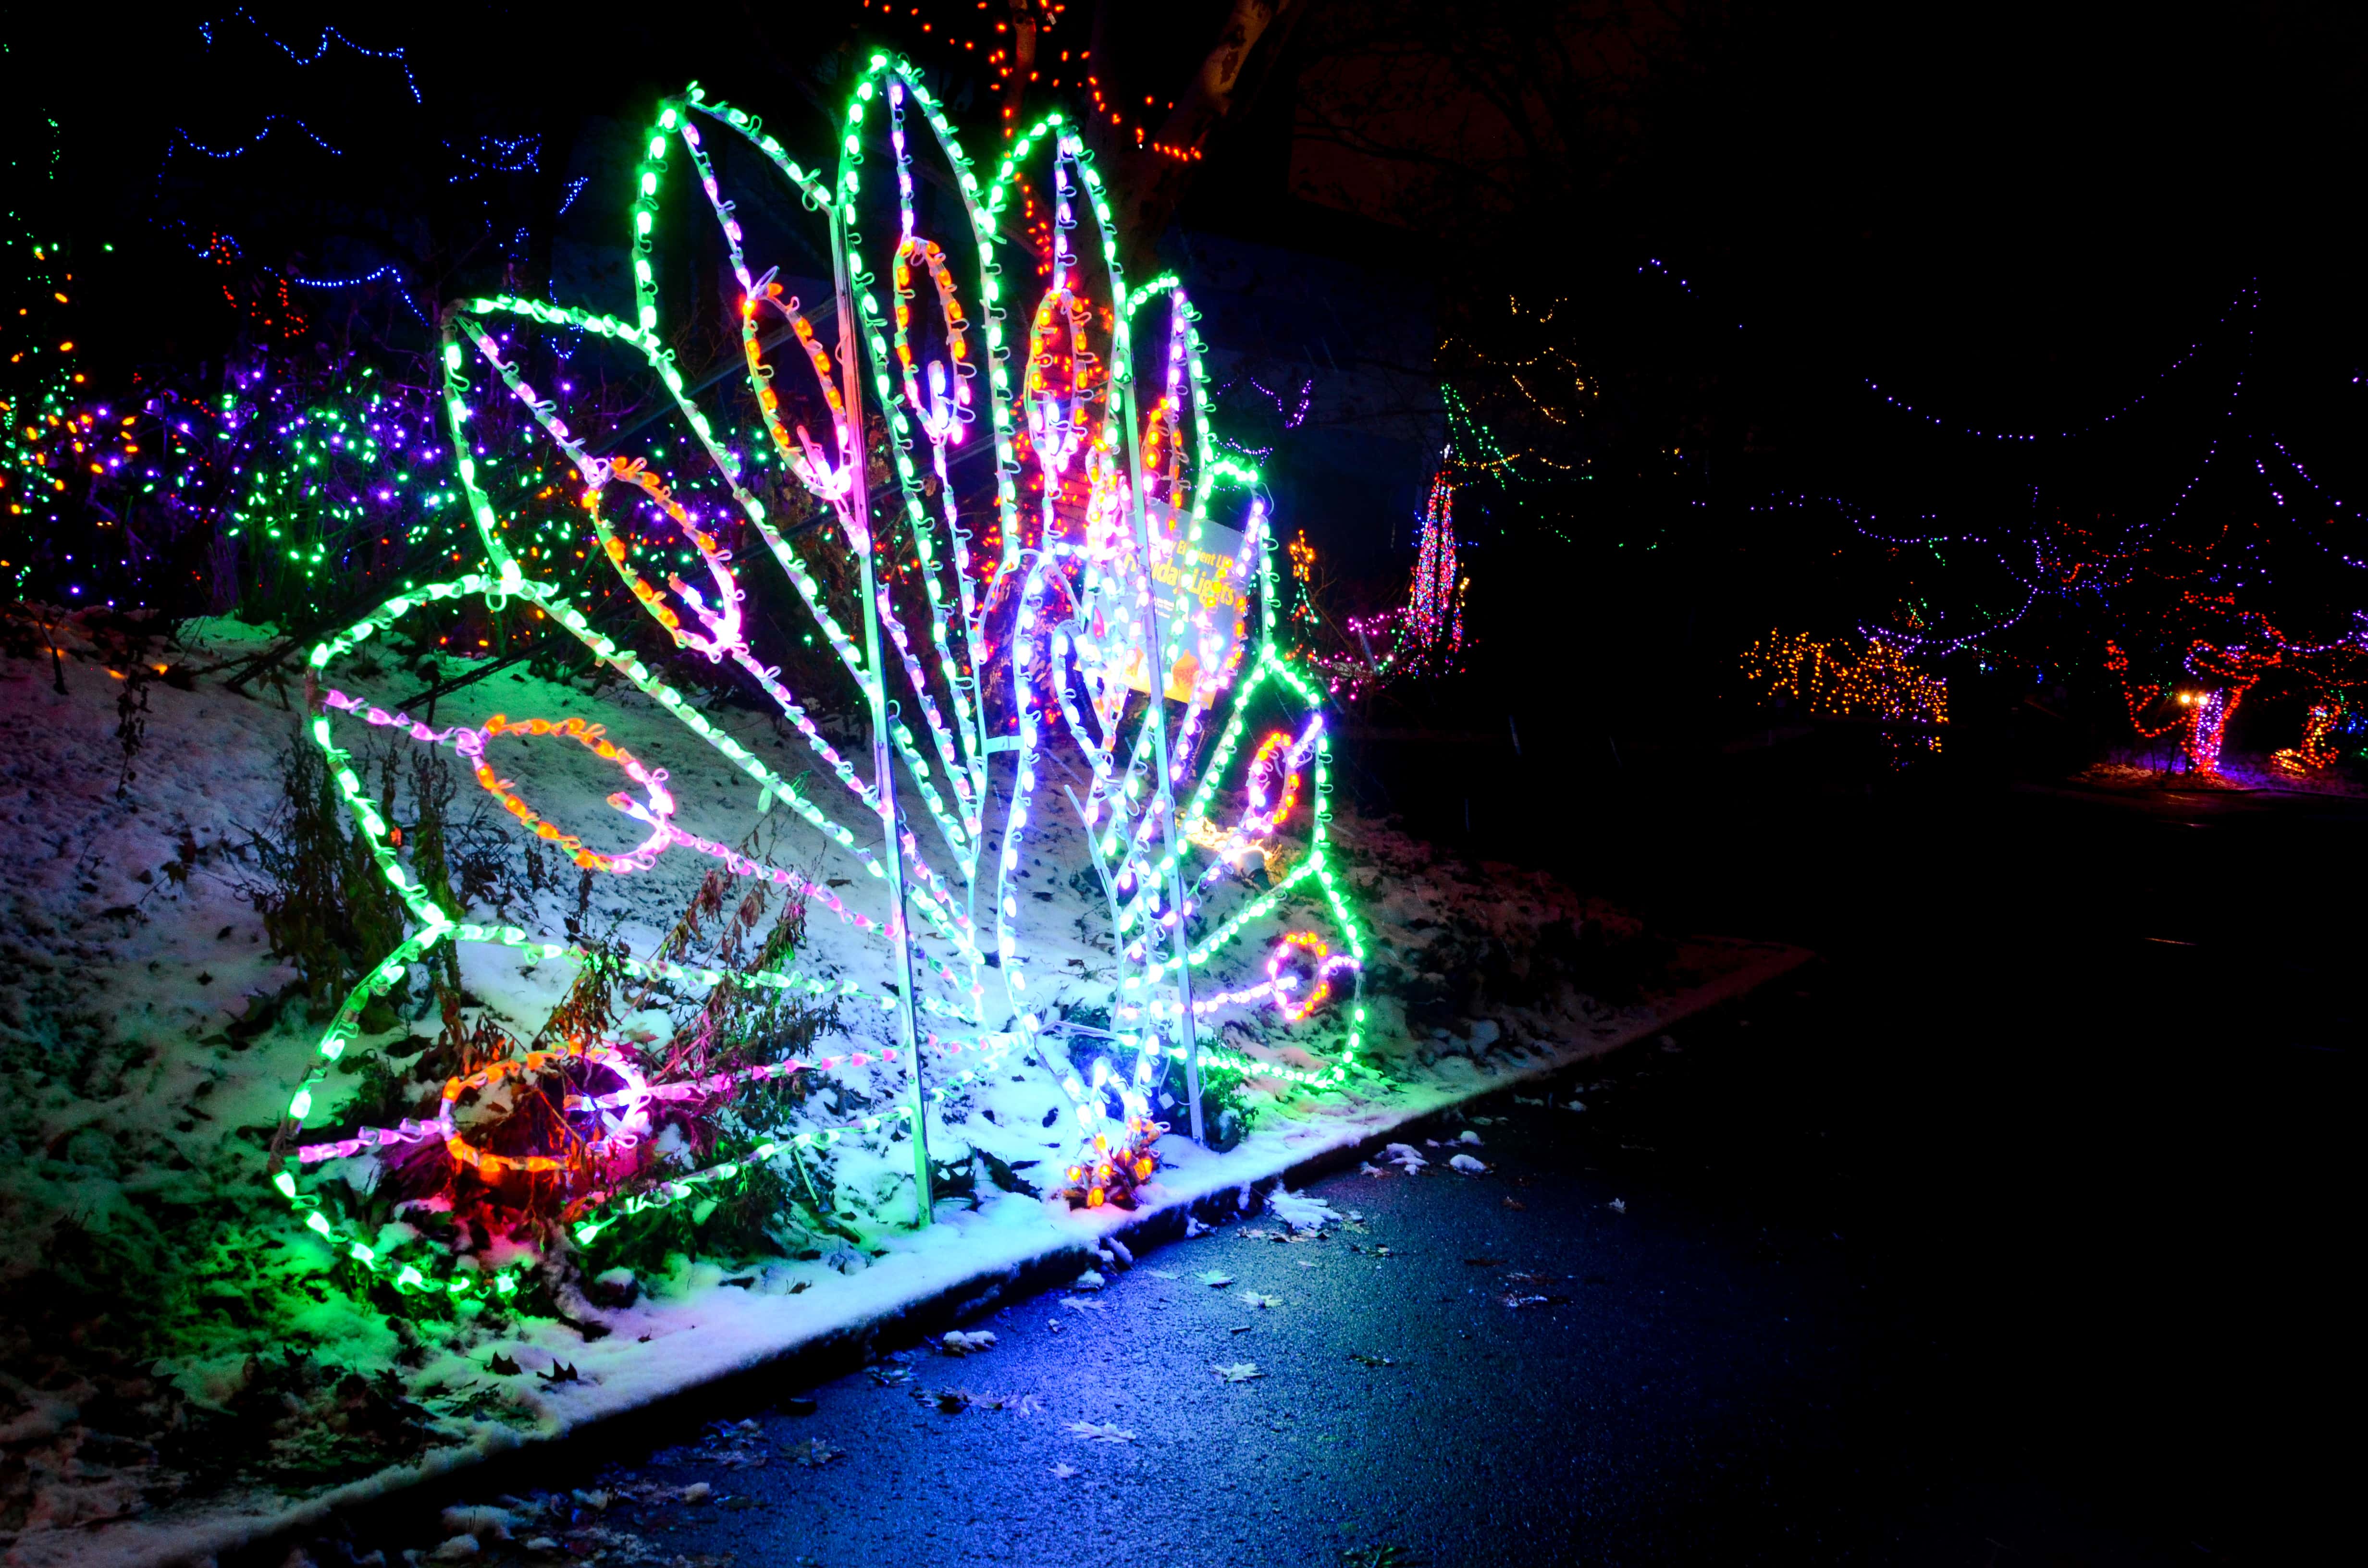 Christmas Lights At The Indianapolis Zoo Are Bigger Than Ever | The Legend 95.9 FM